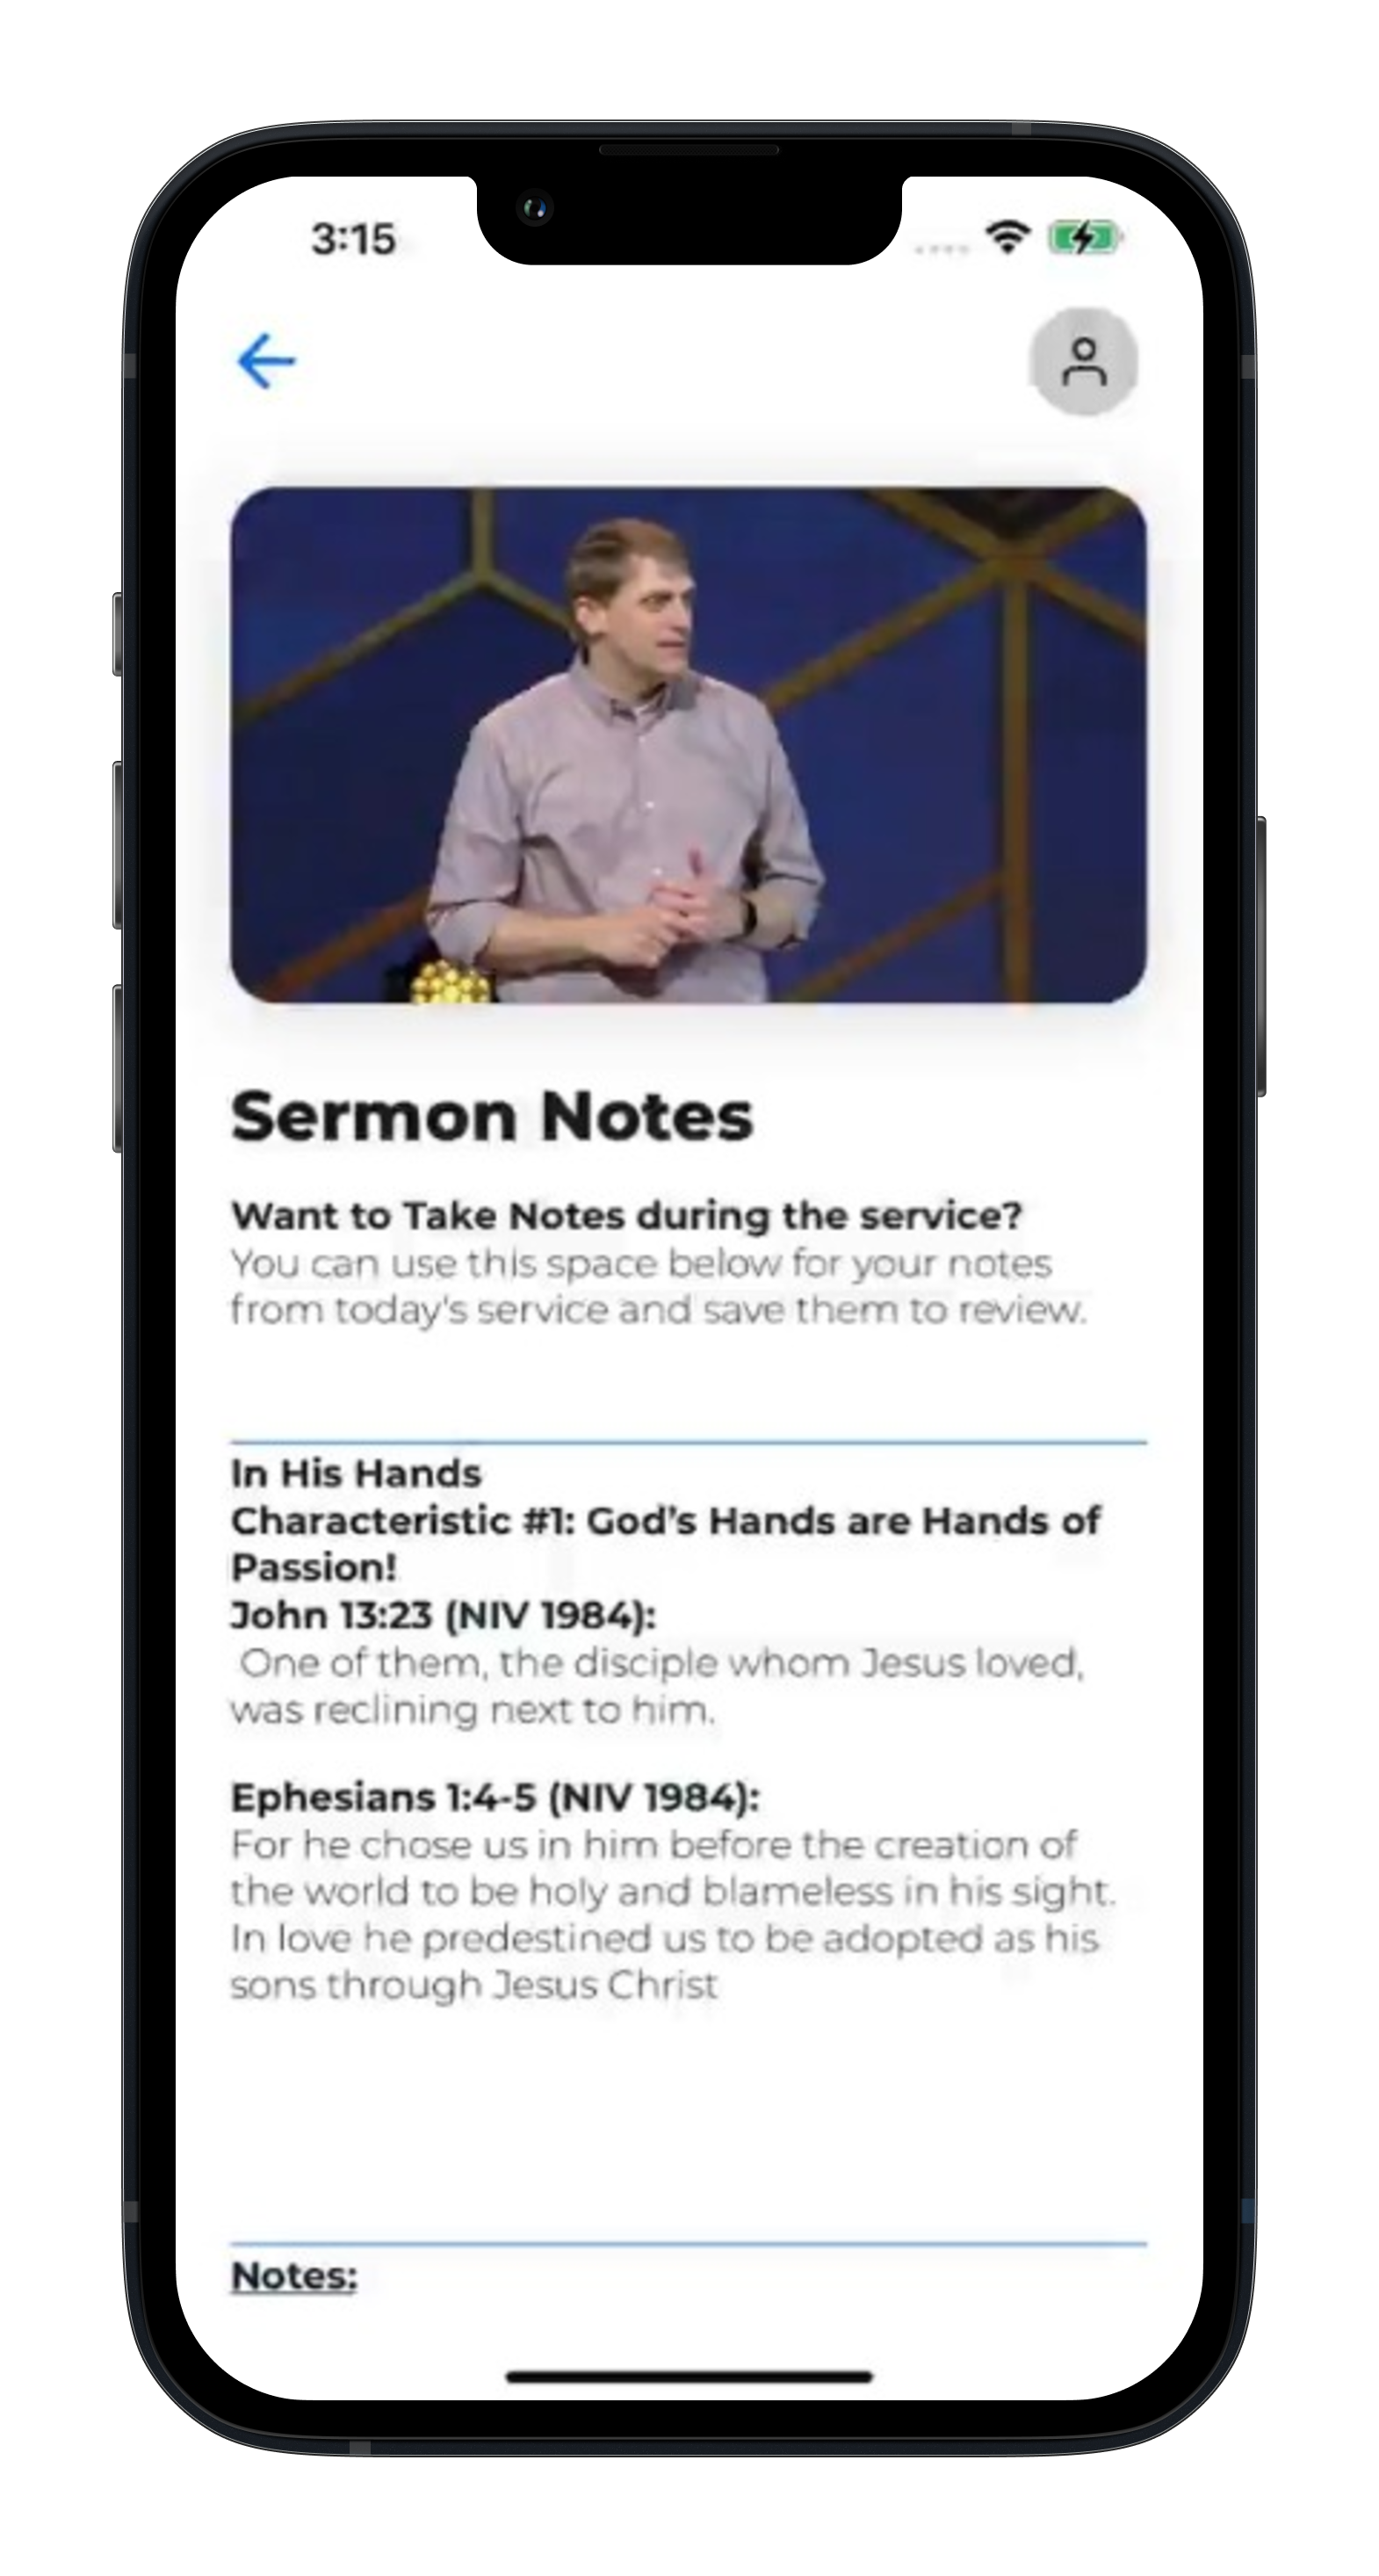 Image displaying the Sermon Notes screen, with sample notes someone has taken about the sermon.